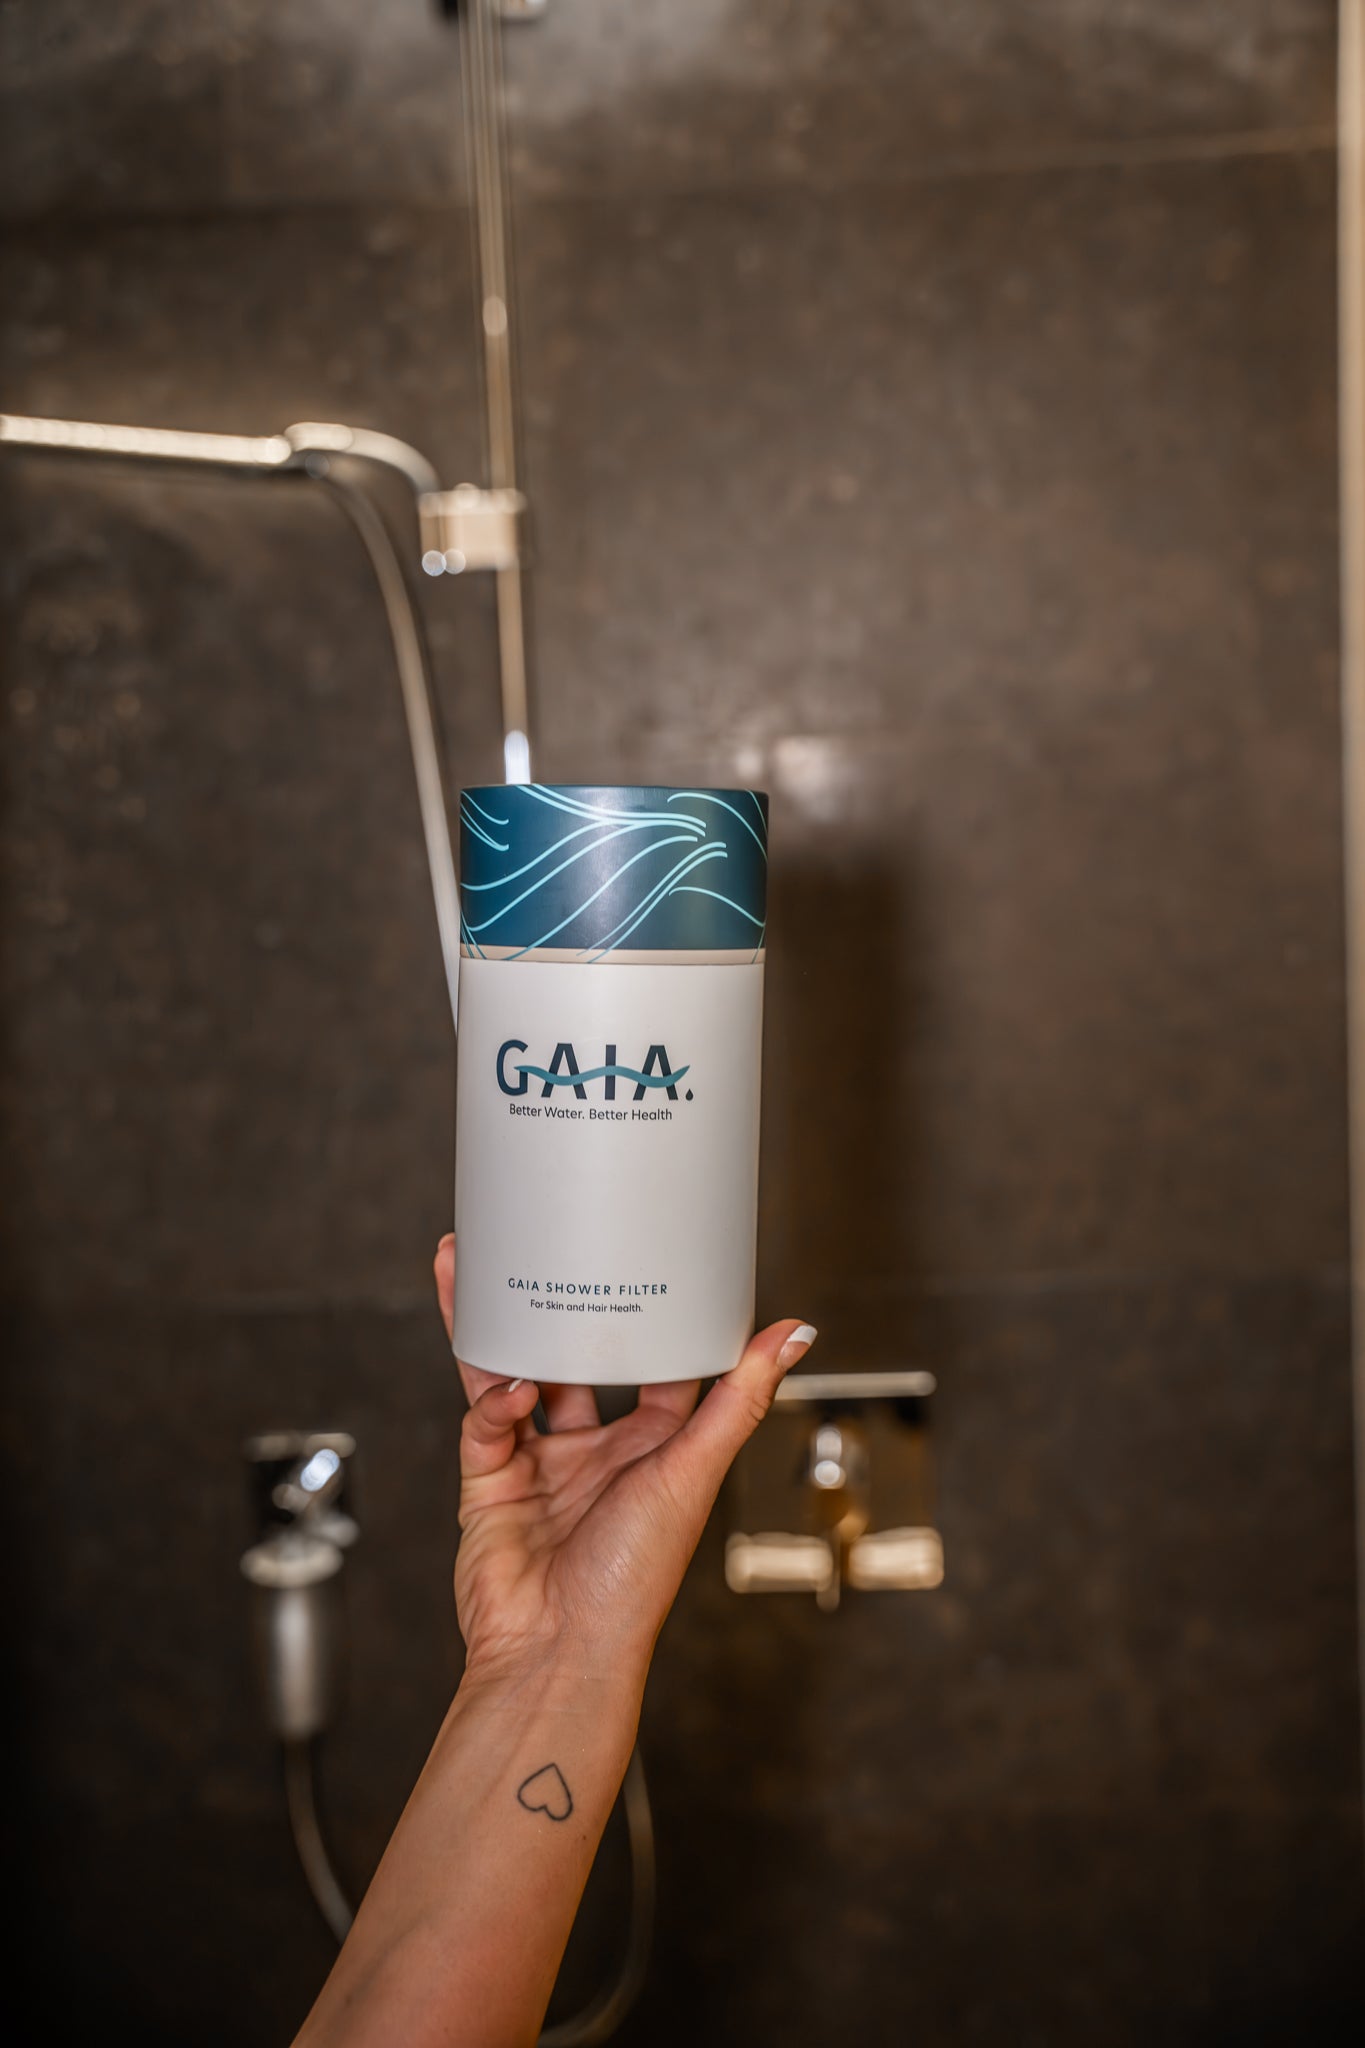 The Gaia Shower Filter